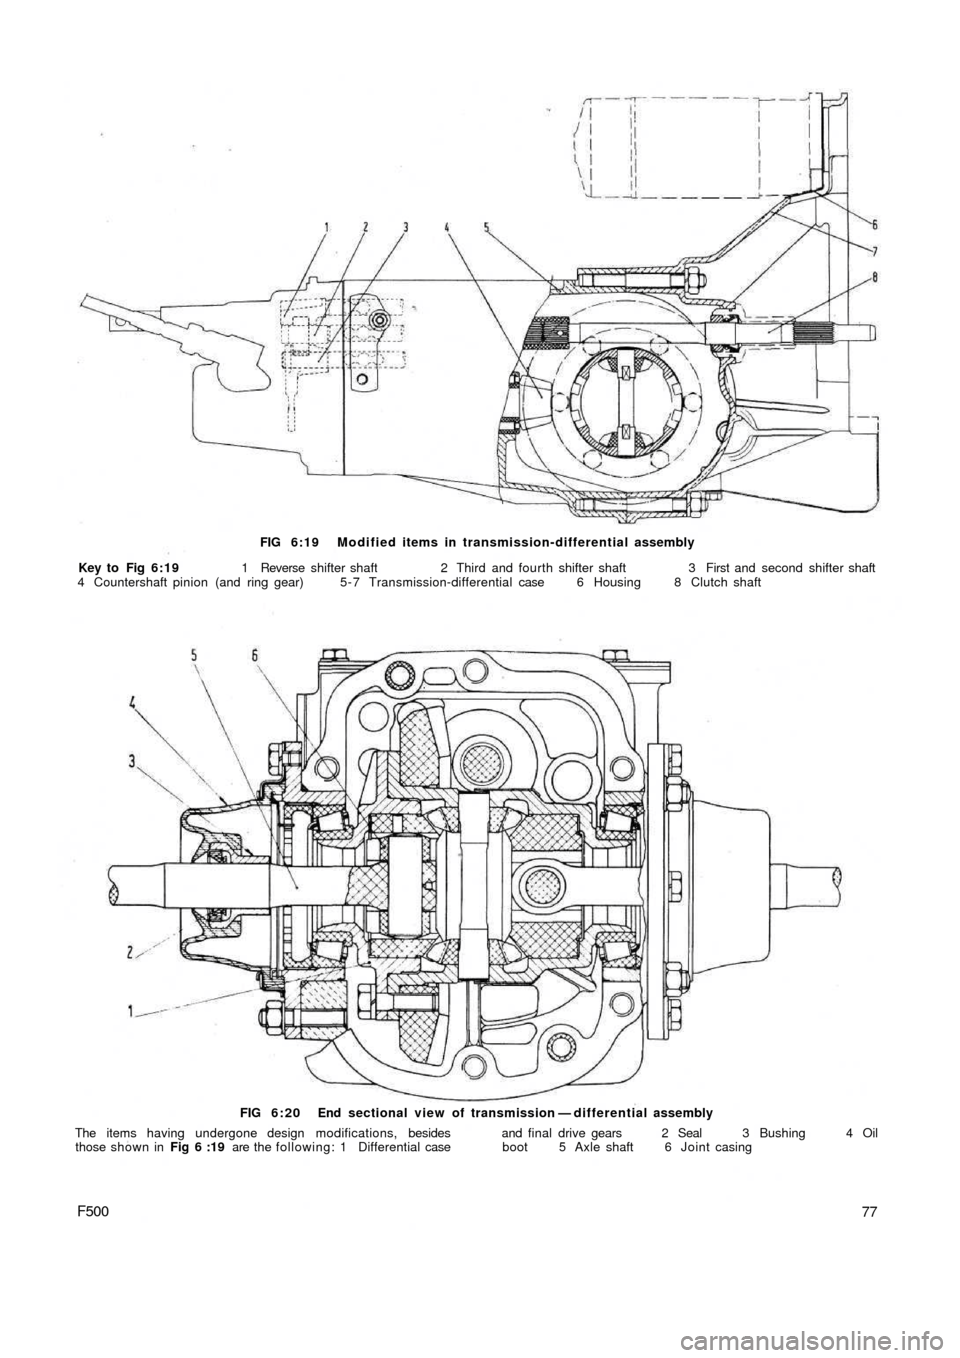 FIAT 500 1965 1.G Workshop Manual FIG 6:19 Modified items in transmission-differential assembly
Key to  Fig  6:19 1 Reverse shifter shaft  2 Third and fourth shifter shaft  3 First and second shifter shaft
4 Countershaft pinion (and r